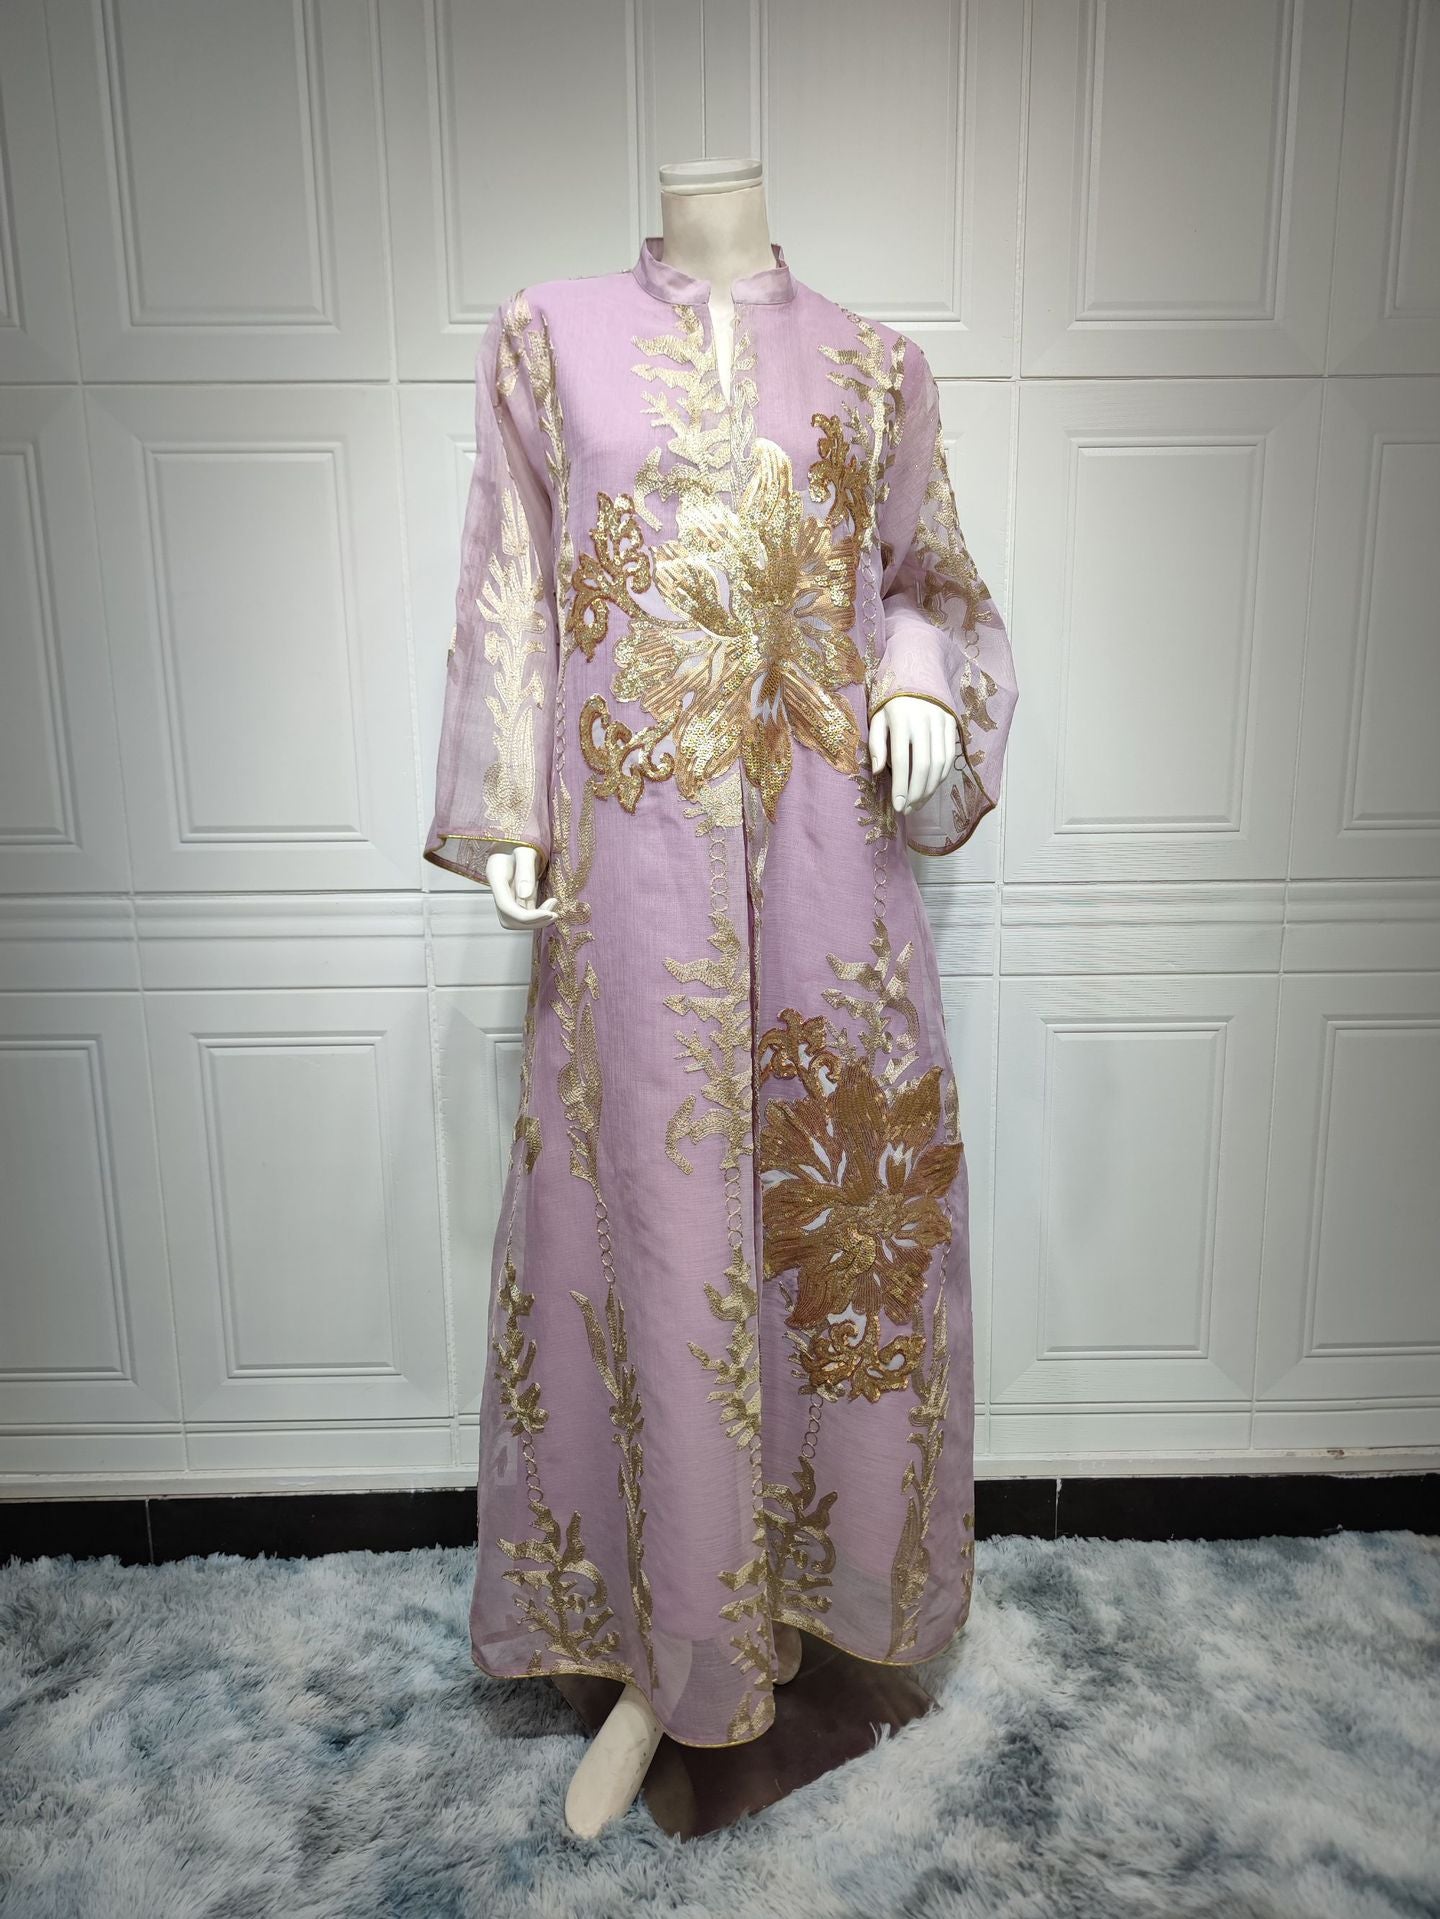 Women's Gold Beaded Embroidered Gauze Dress